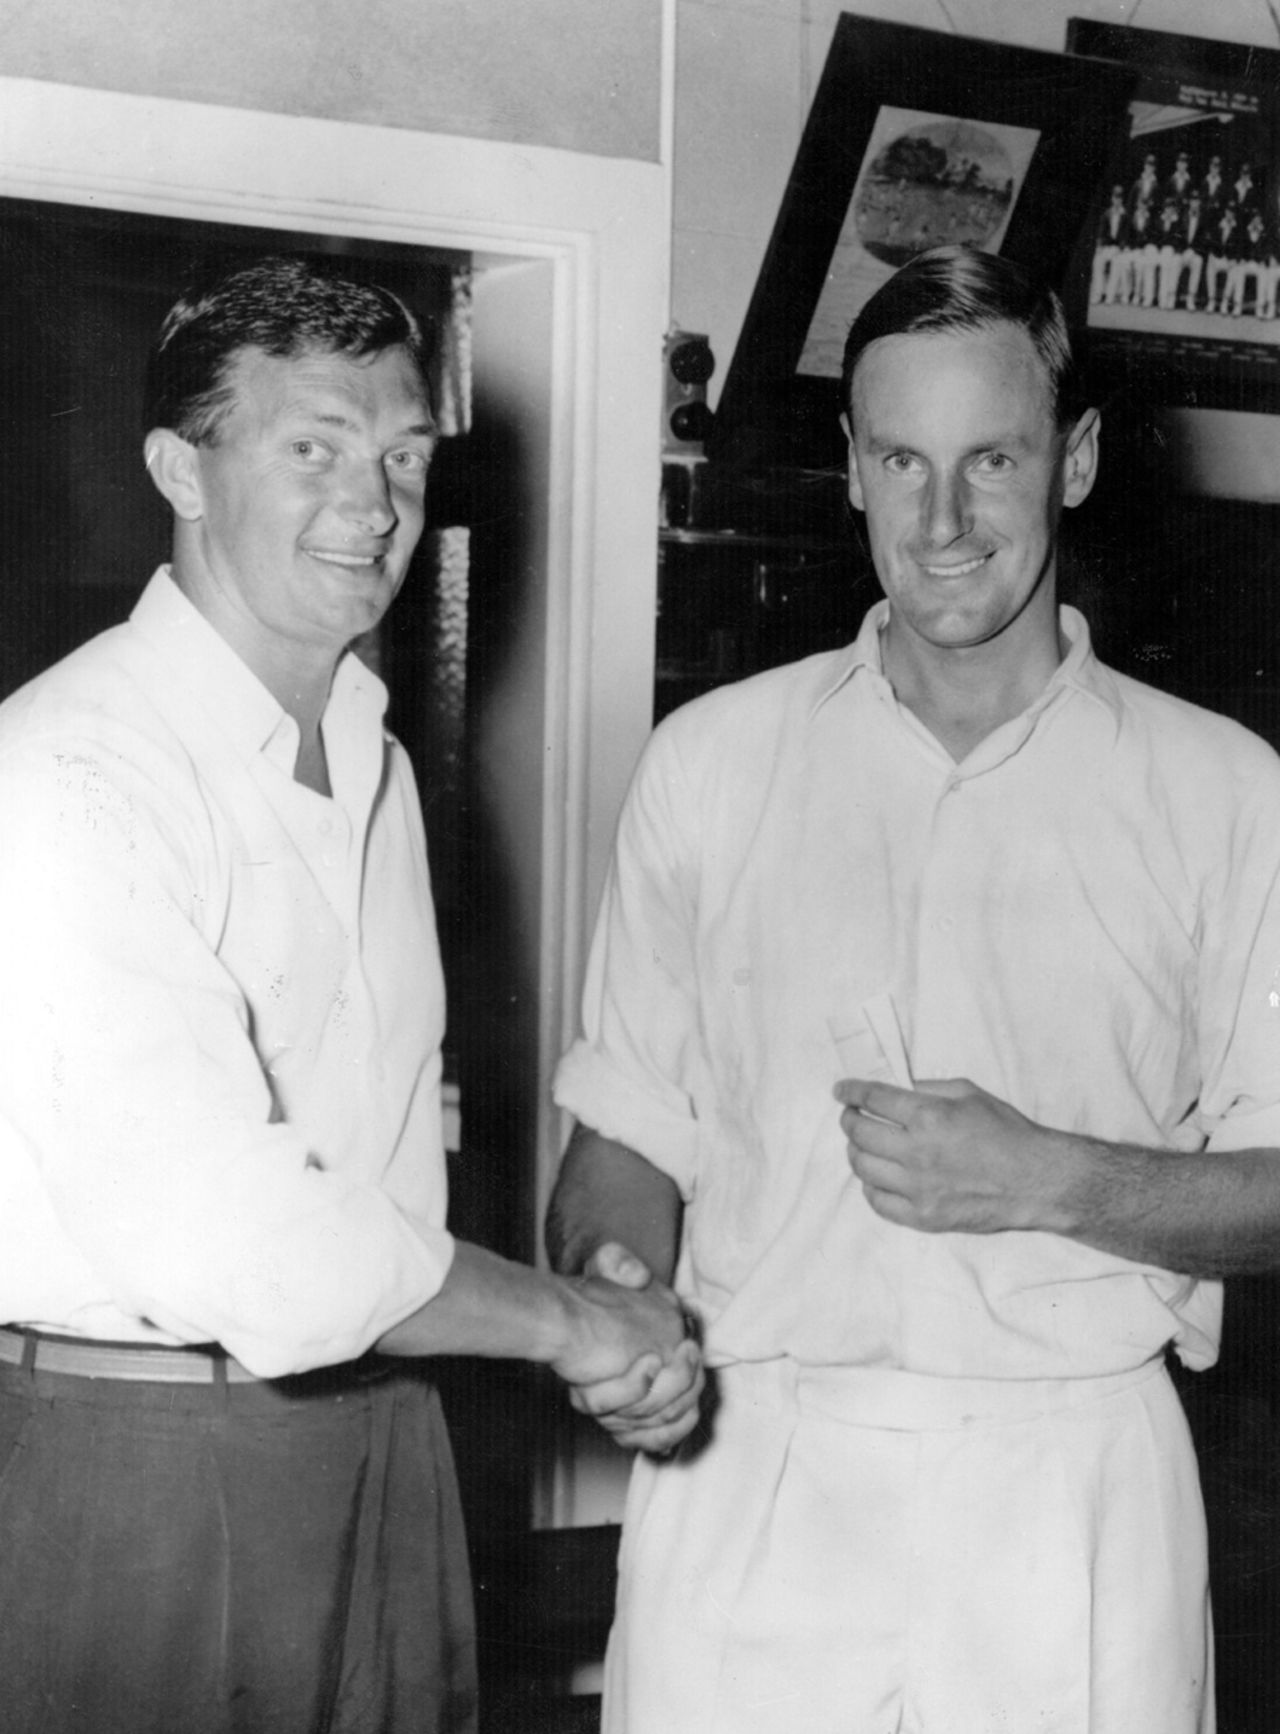 Australian captain Richie Benaud shakes hands with England captain Peter May after Australia regained the Ashes, Australia v England, 4th Test, Adelaide, 6th day, February 5, 1959